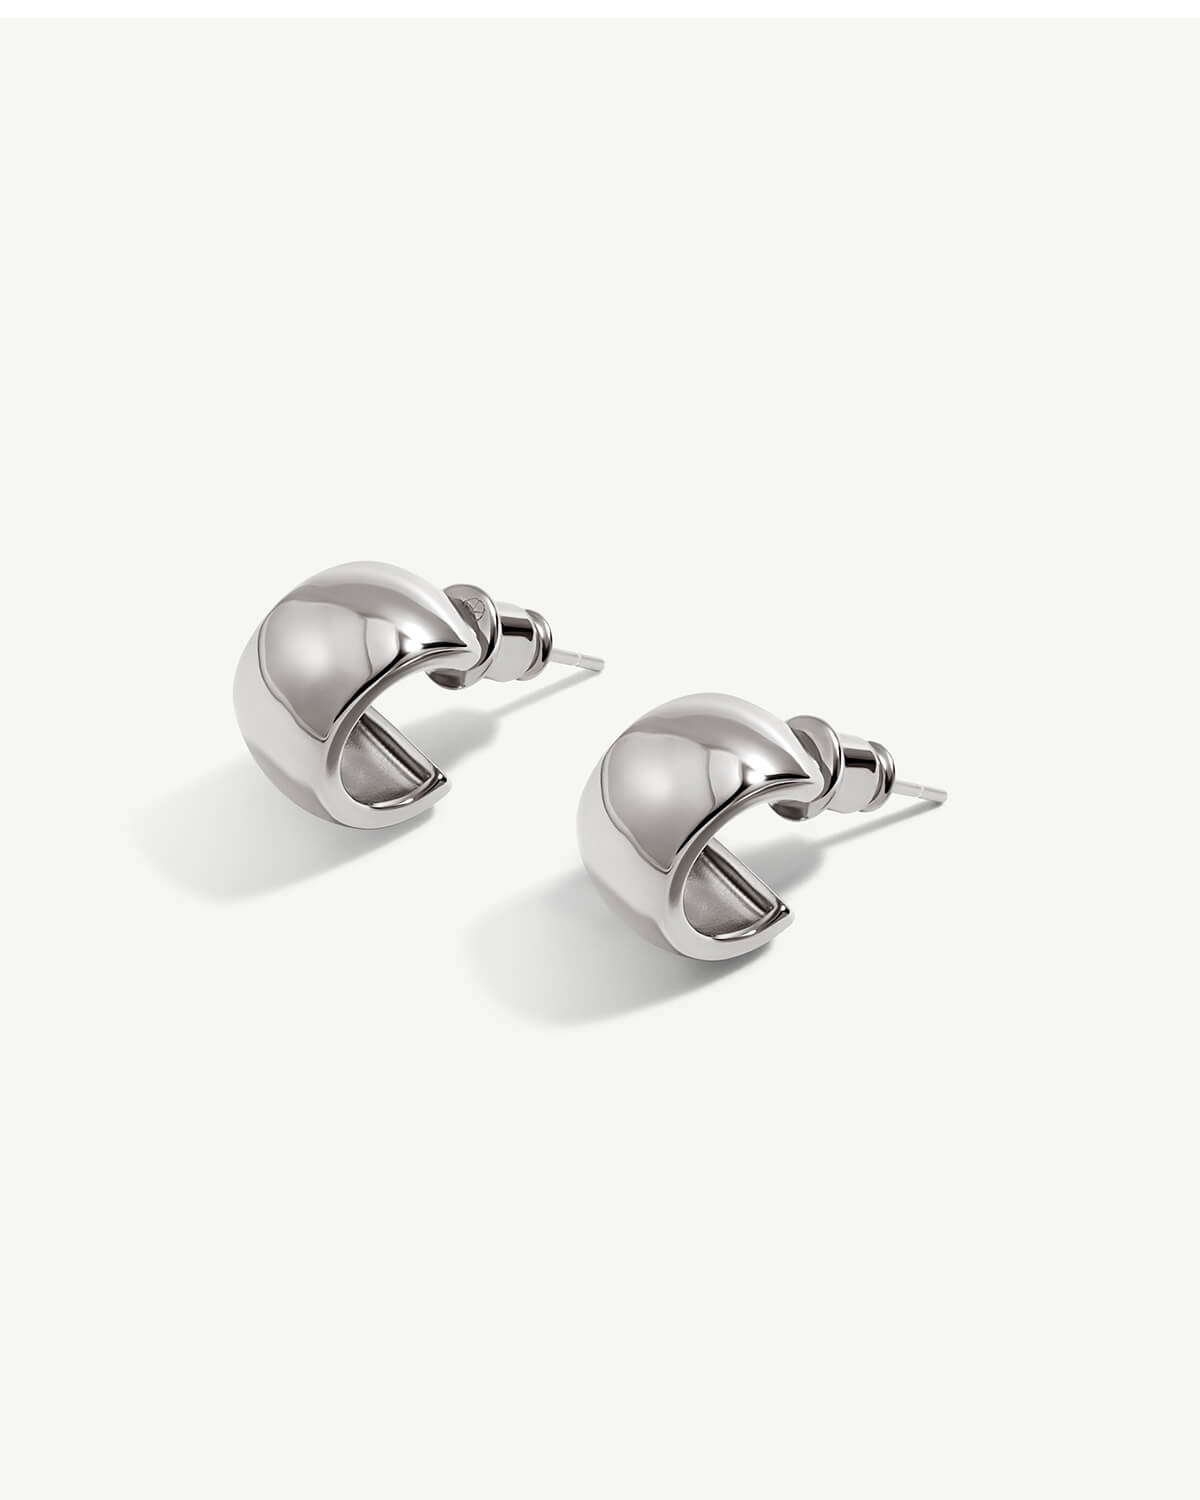 Stud Earrings: Timeless Elegance for Every Occasion